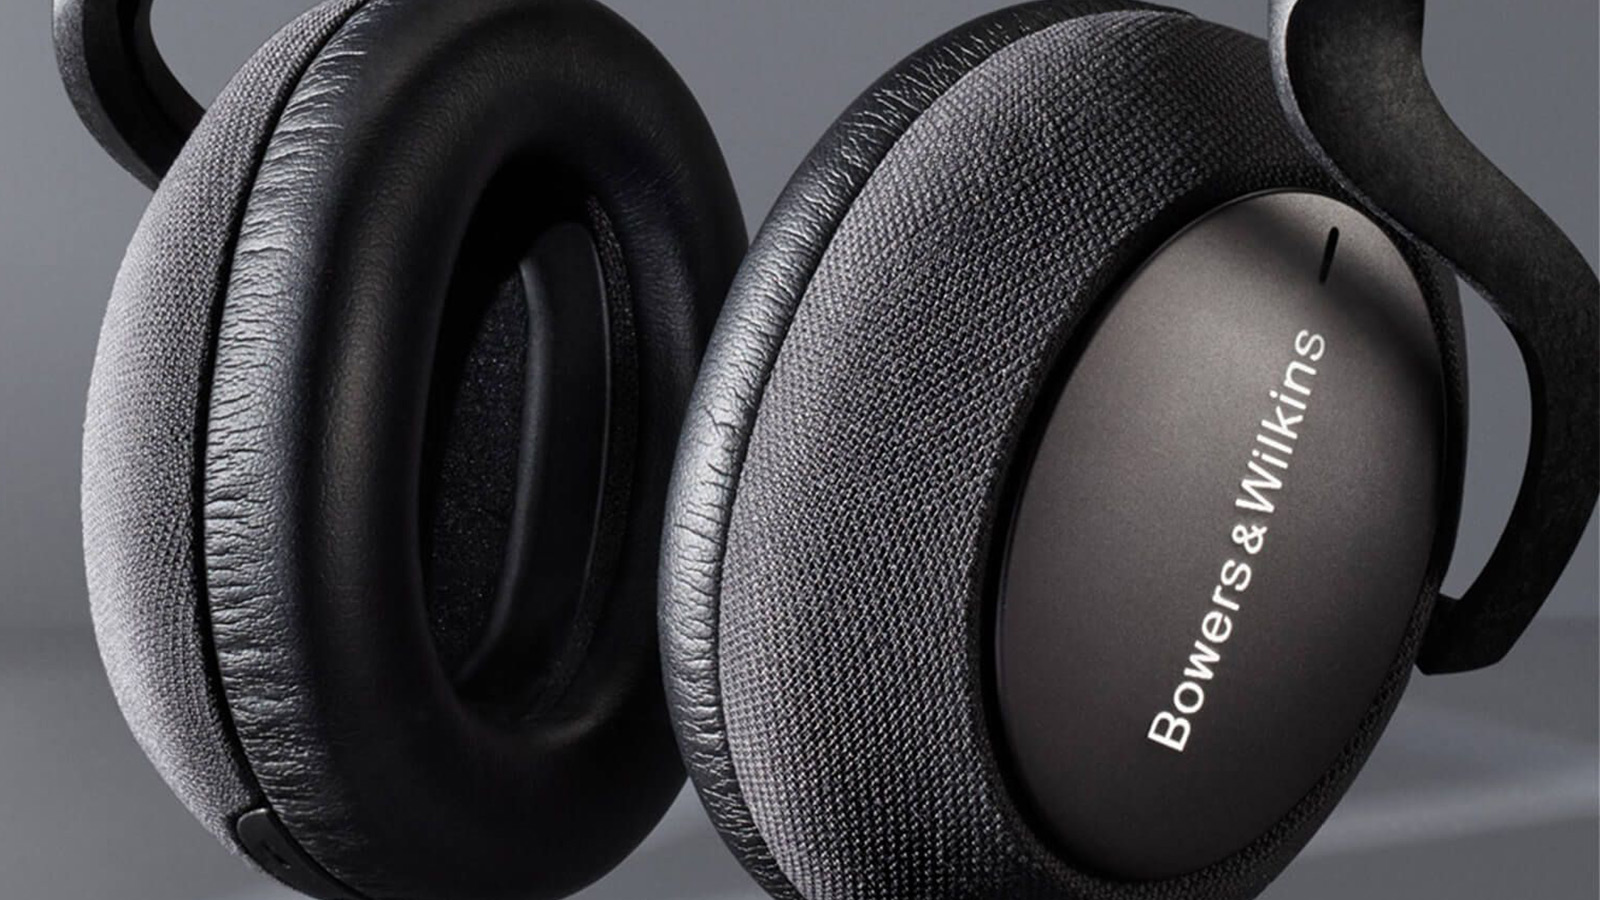 Bowers & Wilkins PX7 Wireless Noise Cancelling Headphones